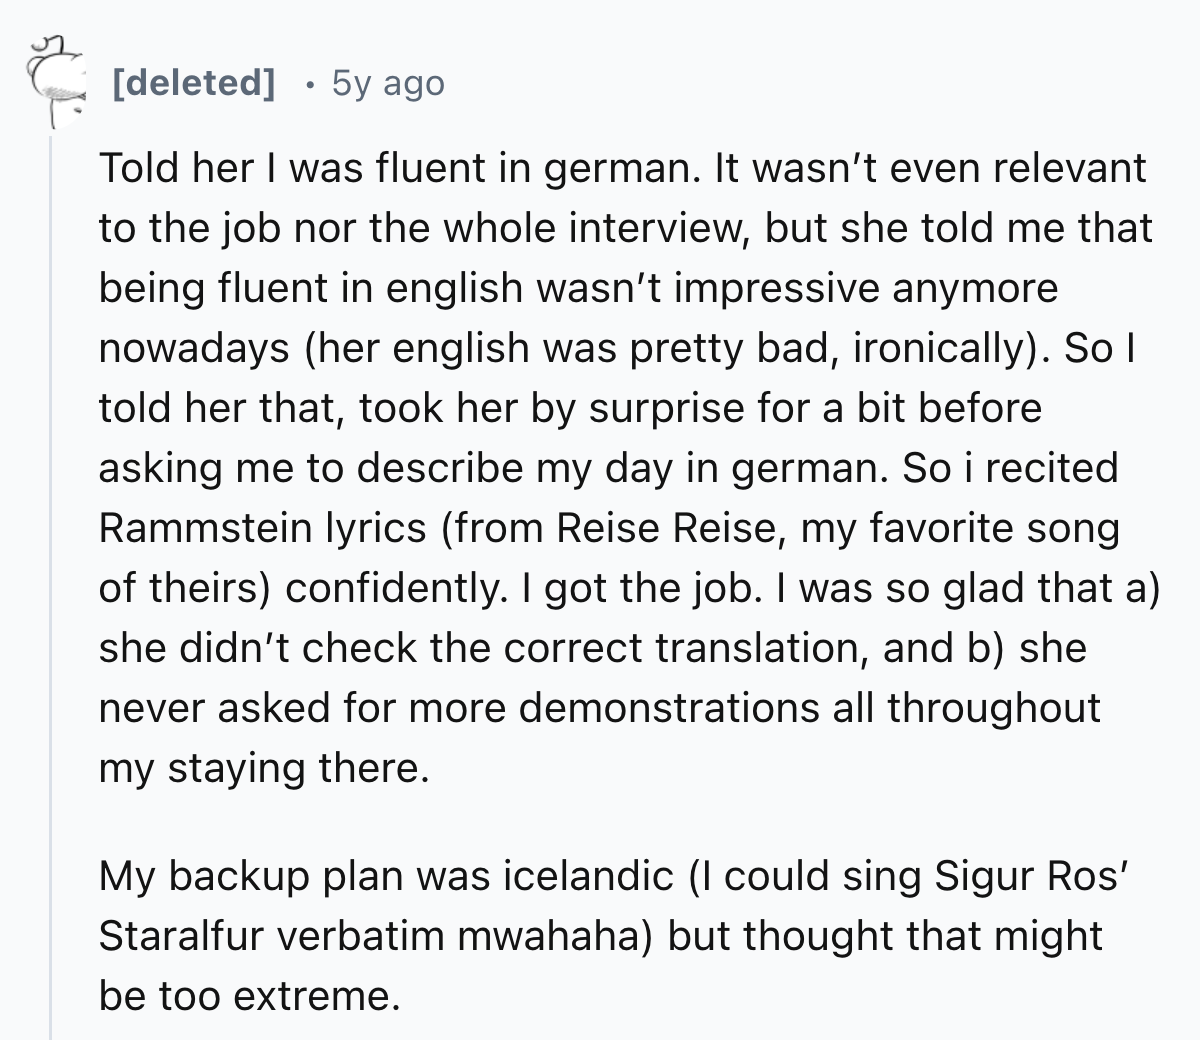 document - deleted 5y ago Told her I was fluent in german. It wasn't even relevant to the job nor the whole interview, but she told me that being fluent in english wasn't impressive anymore nowadays her english was pretty bad, ironically. So I told her th